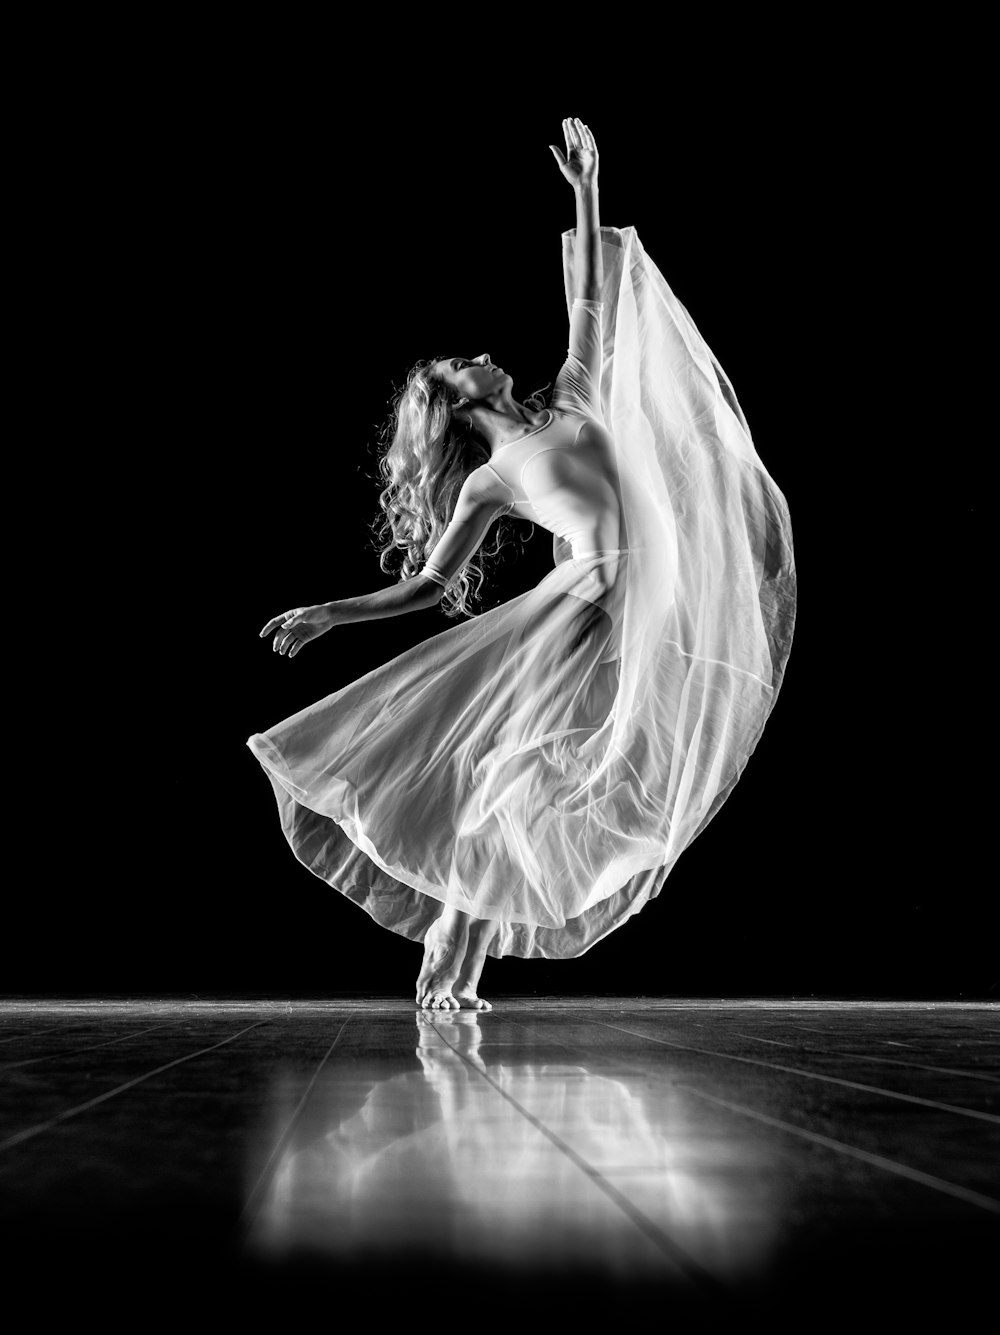 grayscale photography of woman doing ballet